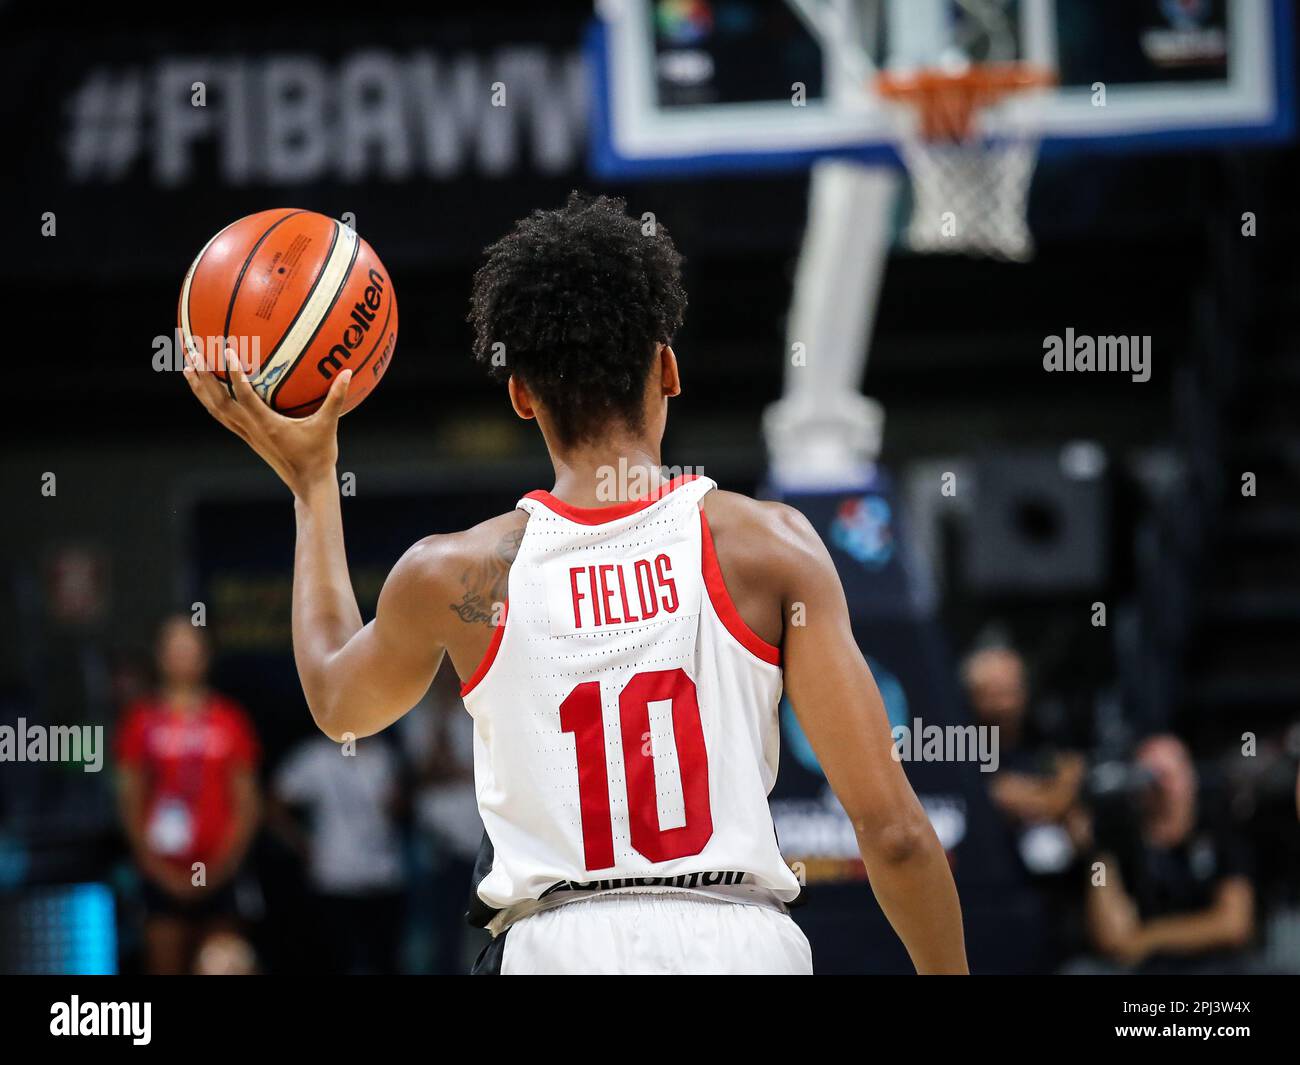 Spain, Tenerife, September 28, 2018: Canadian basketball player Nirra Fields during the FIBA Women's Basketball World Cup in Spain. Stock Photo